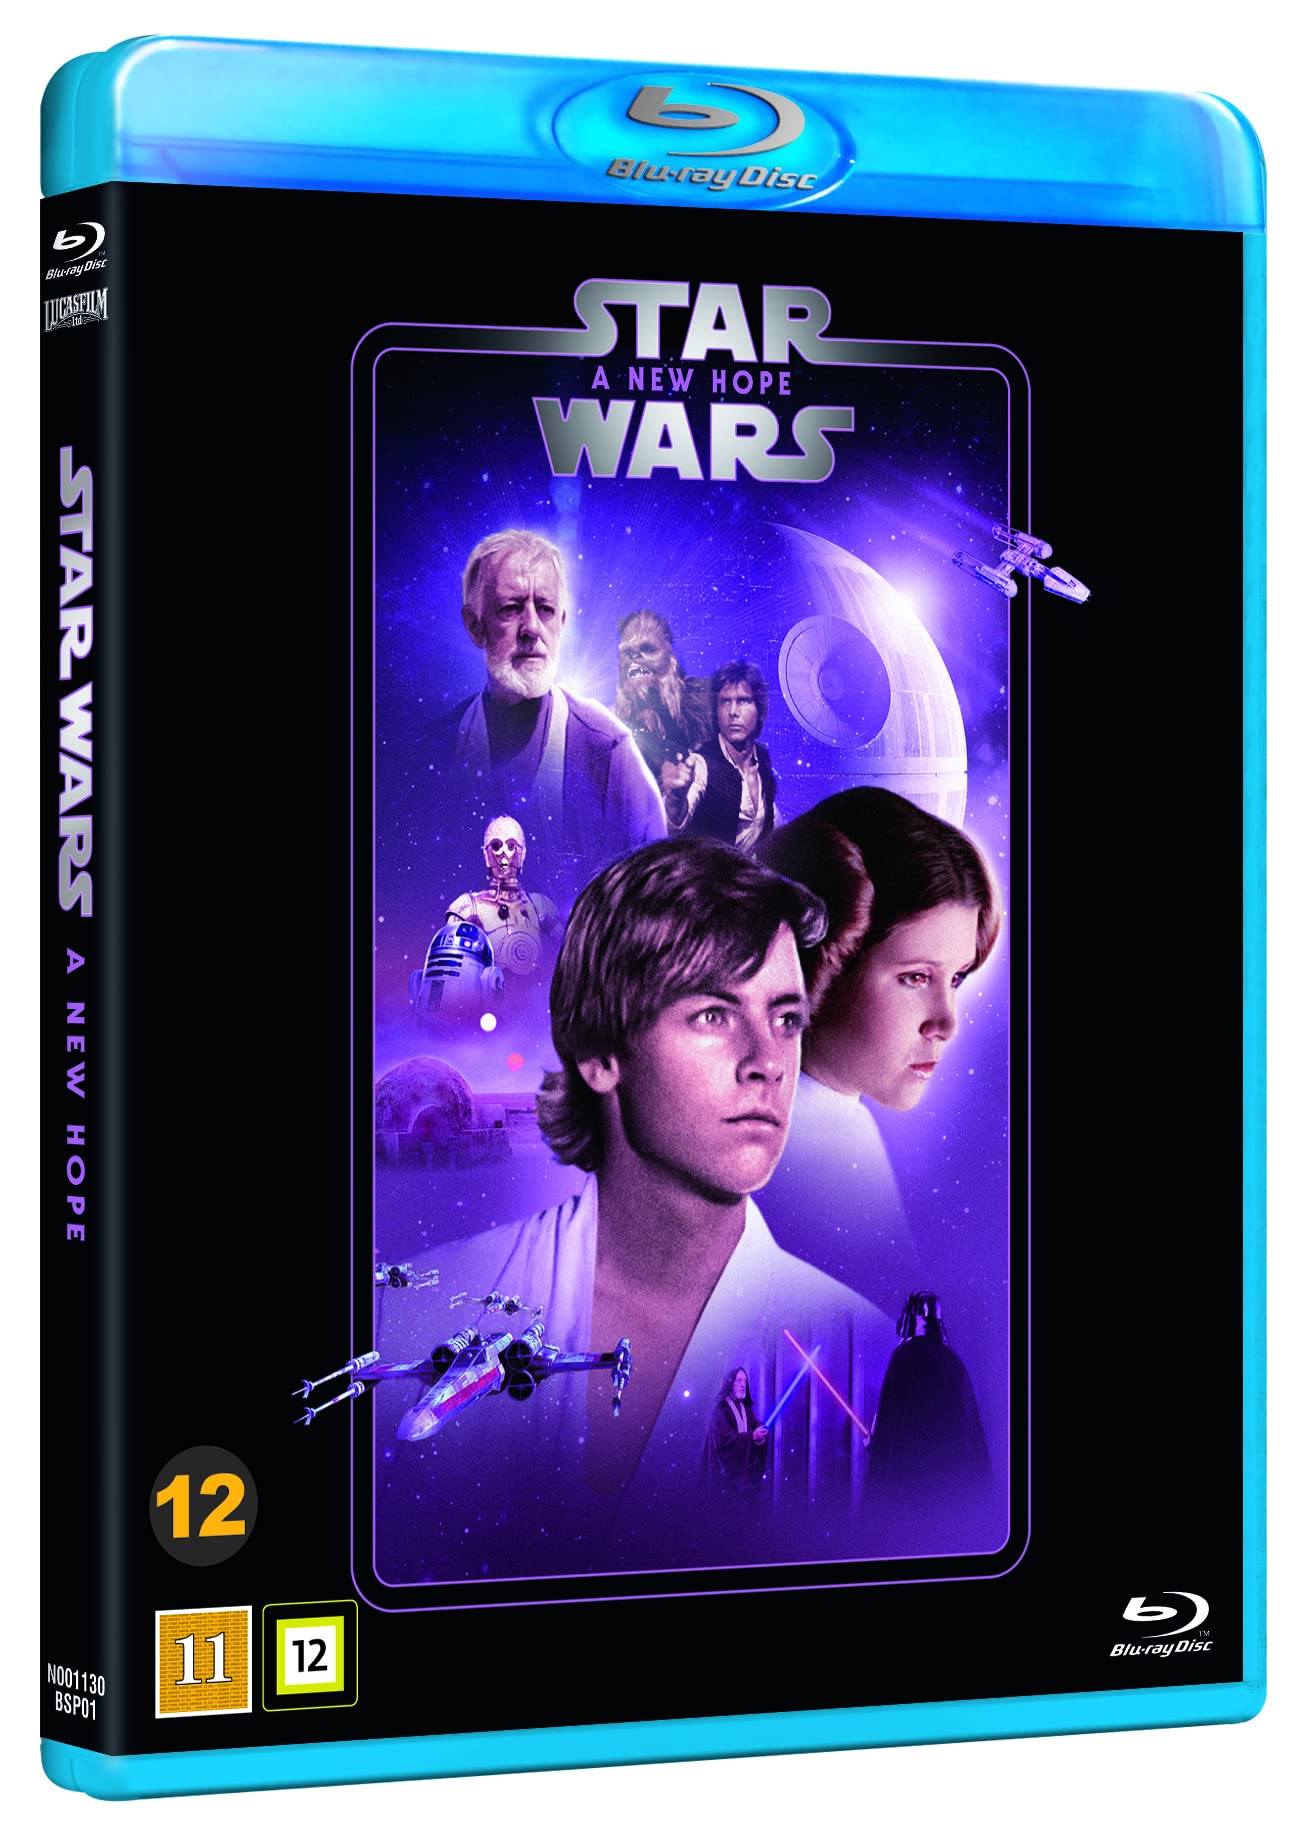 Star Wars: Episode 4 - A New Hope/Movies/Standard/DVD